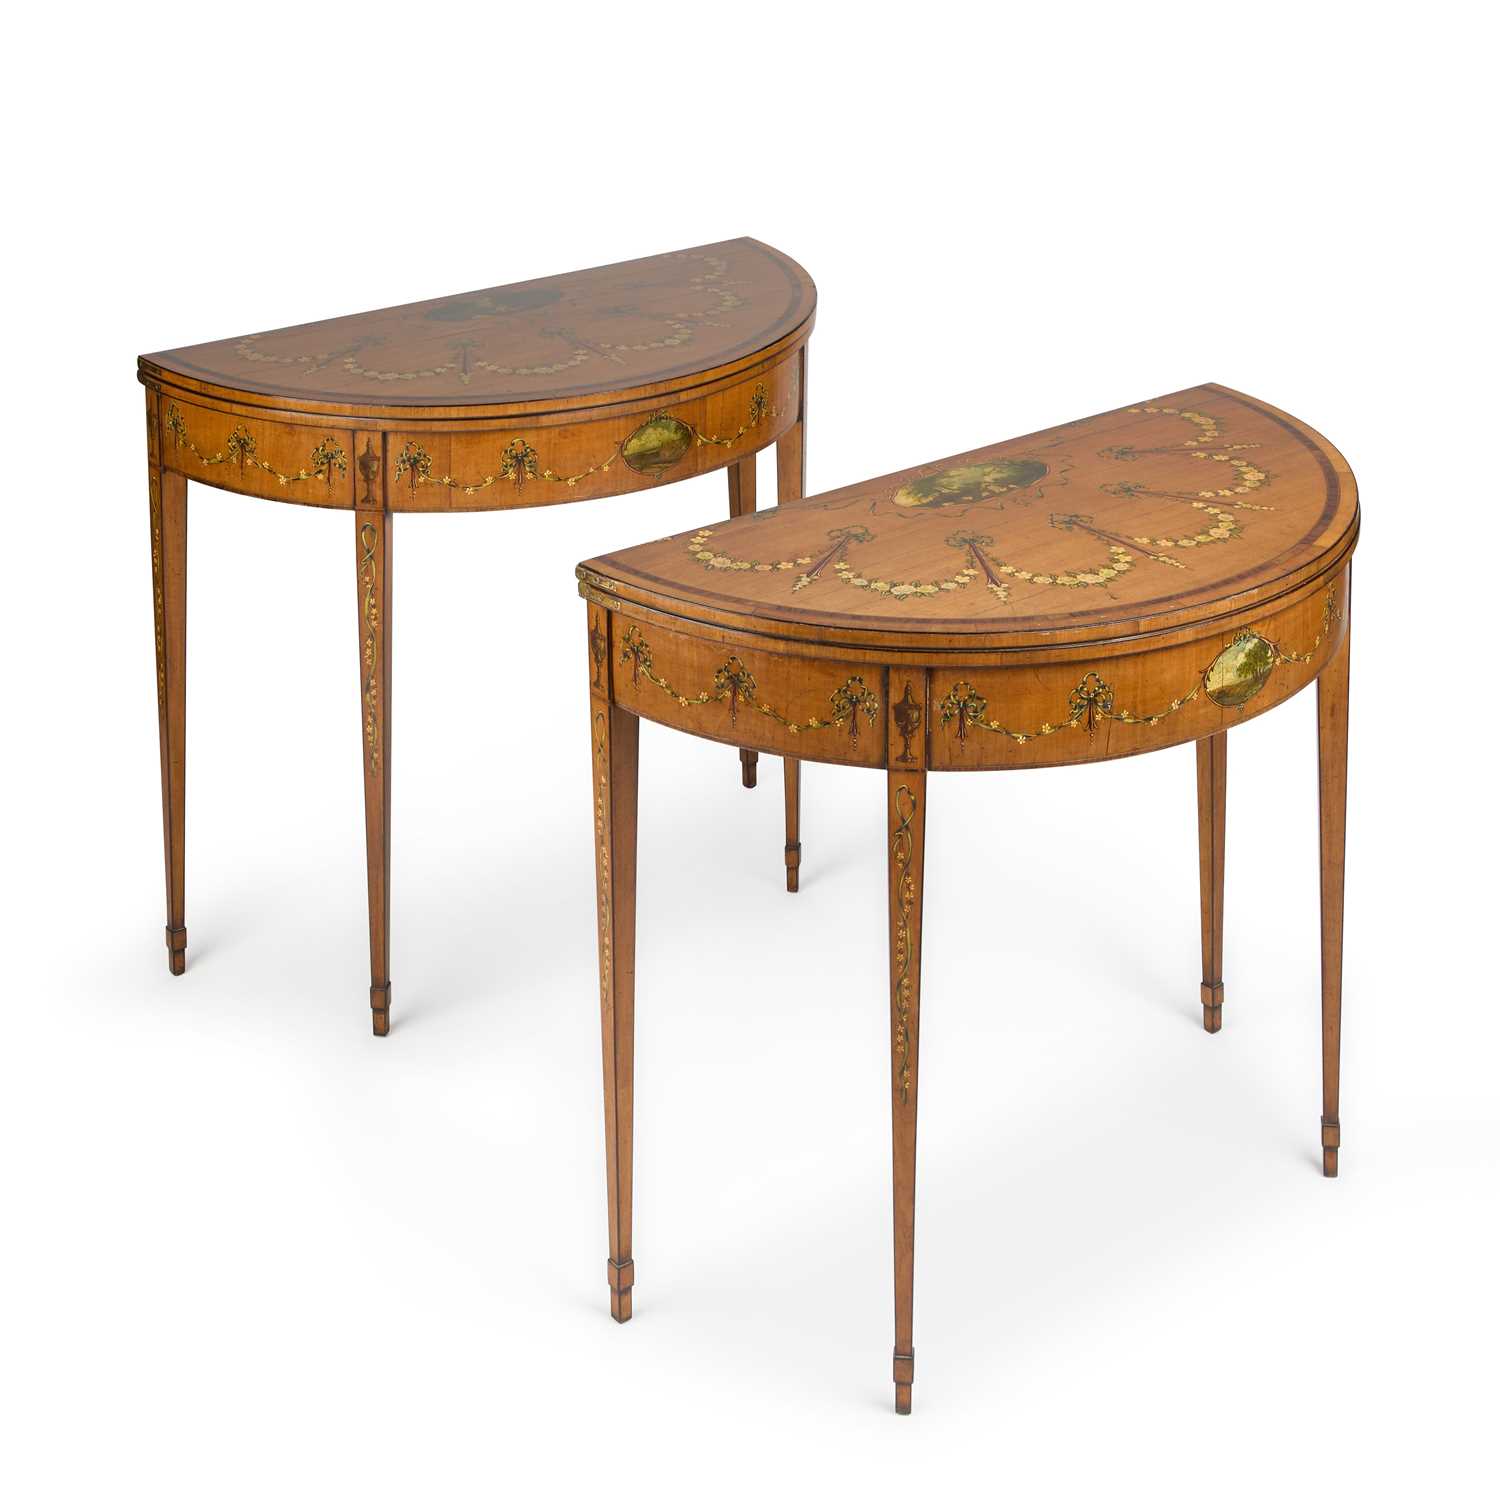 A PAIR OF 19TH CENTURY SHERATON REVIVAL PAINTED AND ROSEWOOD BANDED SATINWOOD CARD TABLES